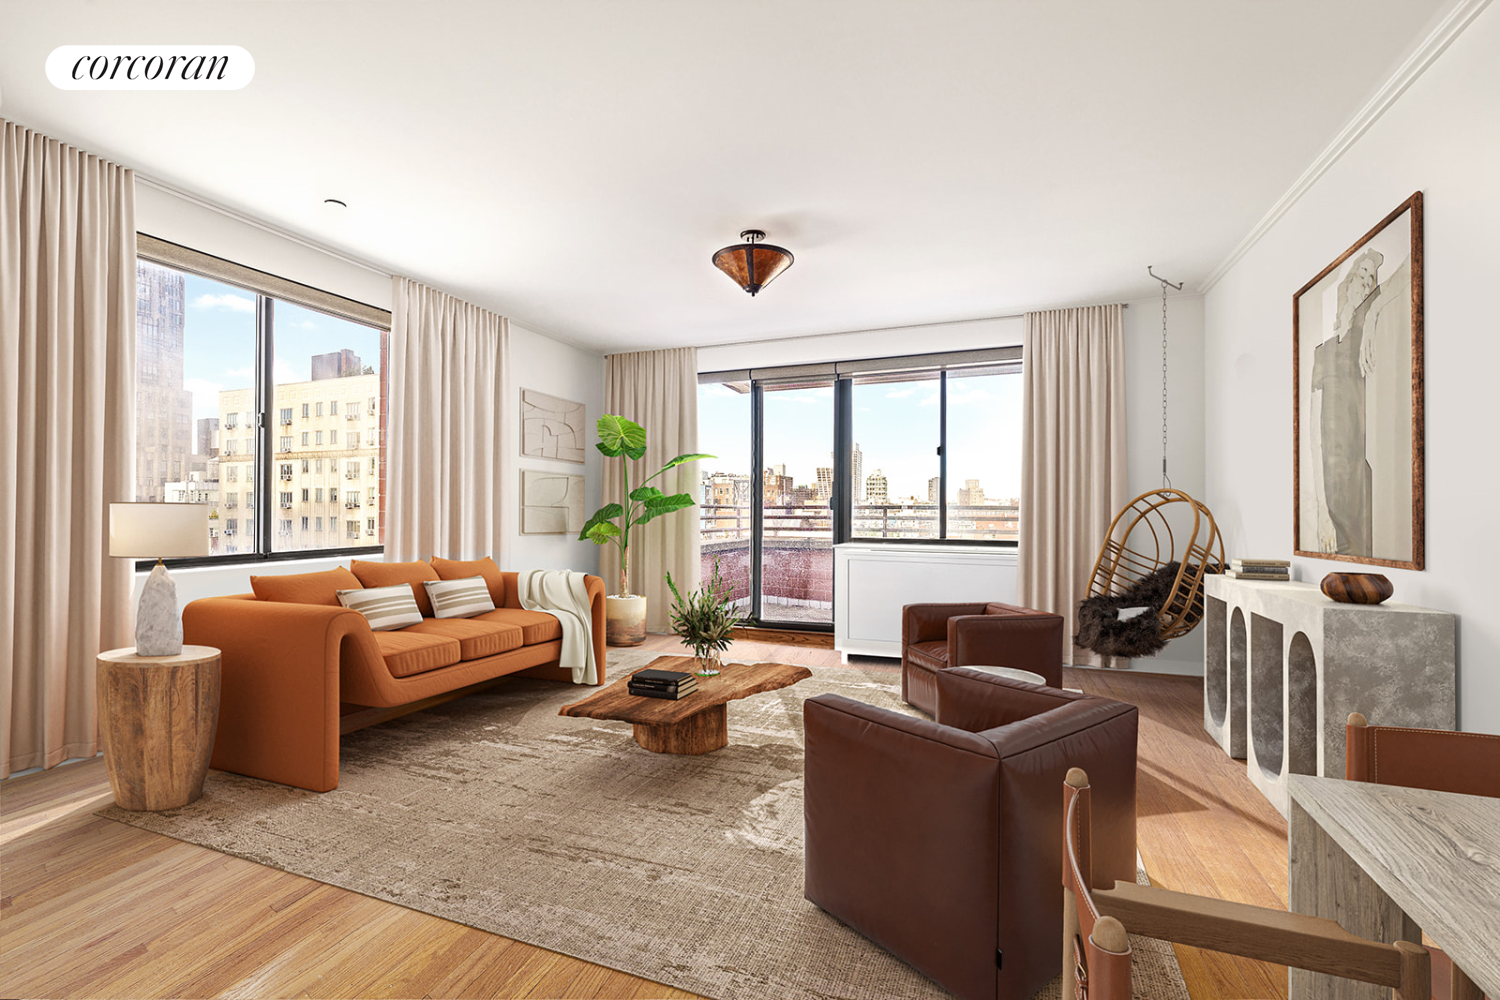 181 7th Avenue 10A, Chelsea, Downtown, NYC - 2 Bedrooms  
2 Bathrooms  
4 Rooms - 